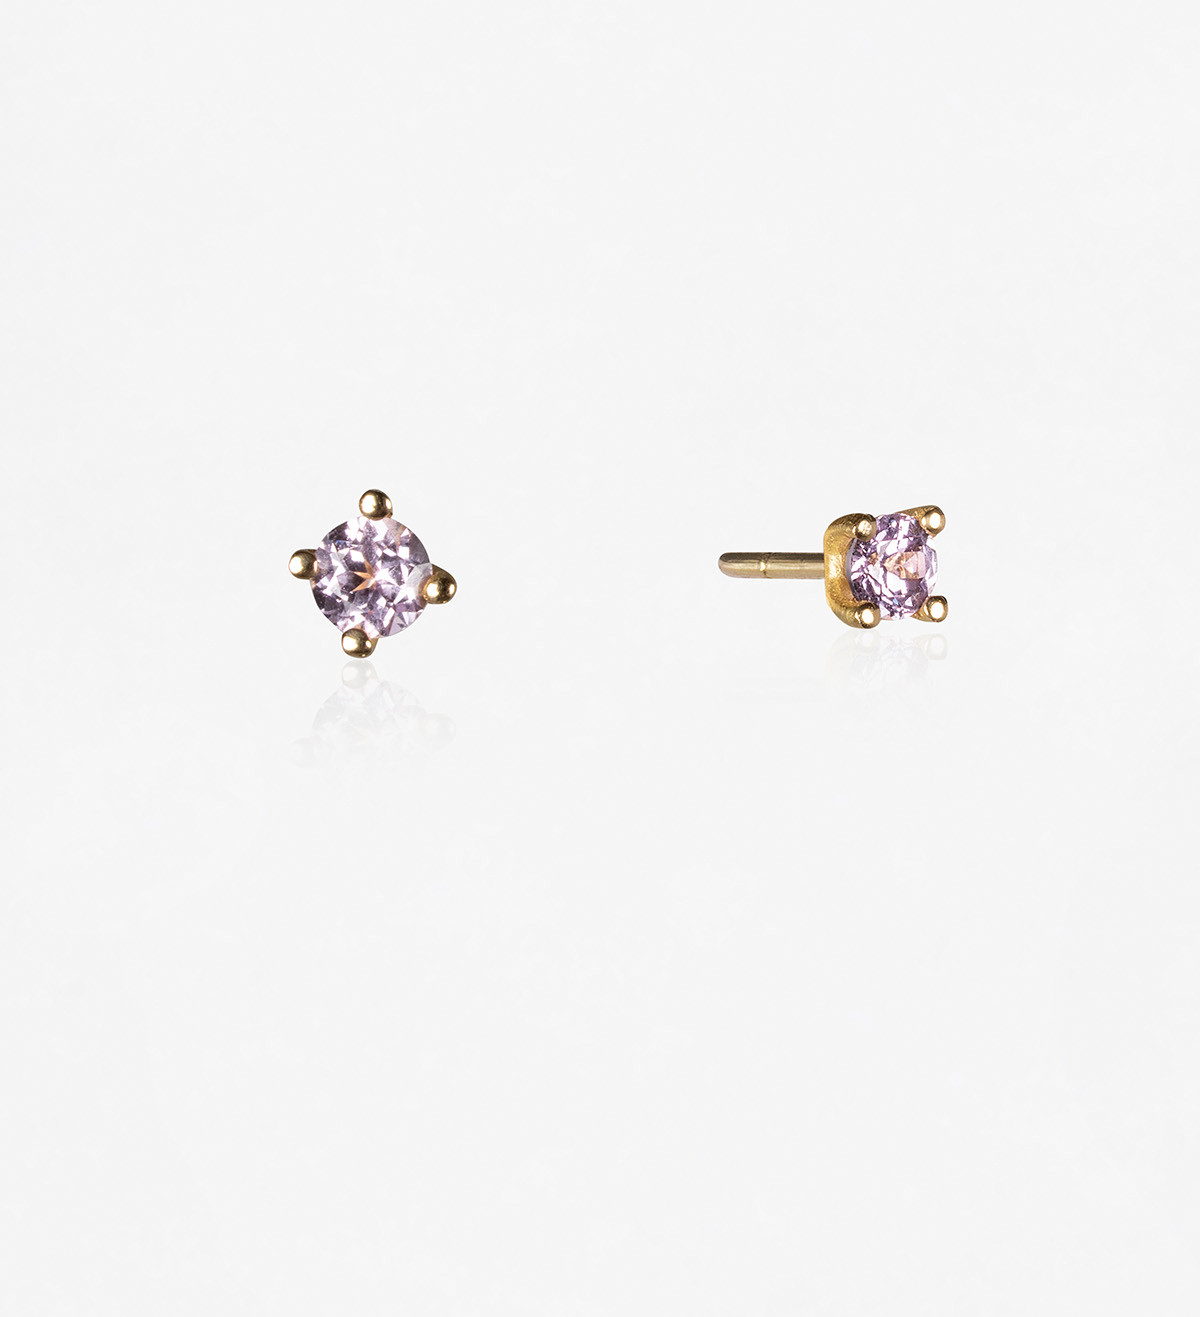 18k gold earrings with Wennick-Lefèvre pink sapphires 0,42ct